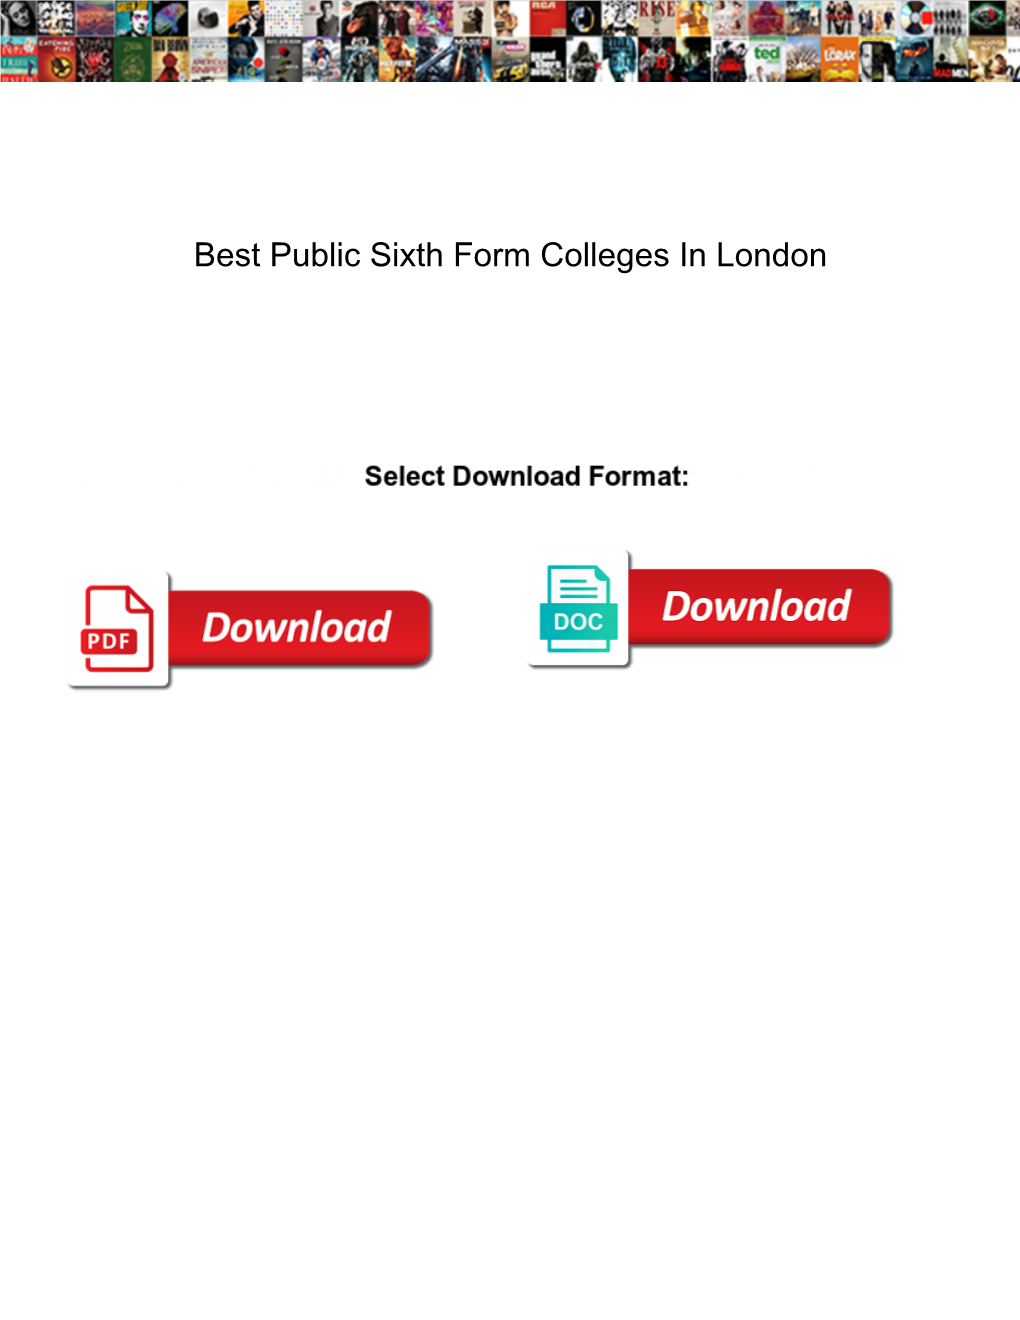 Best Public Sixth Form Colleges in London